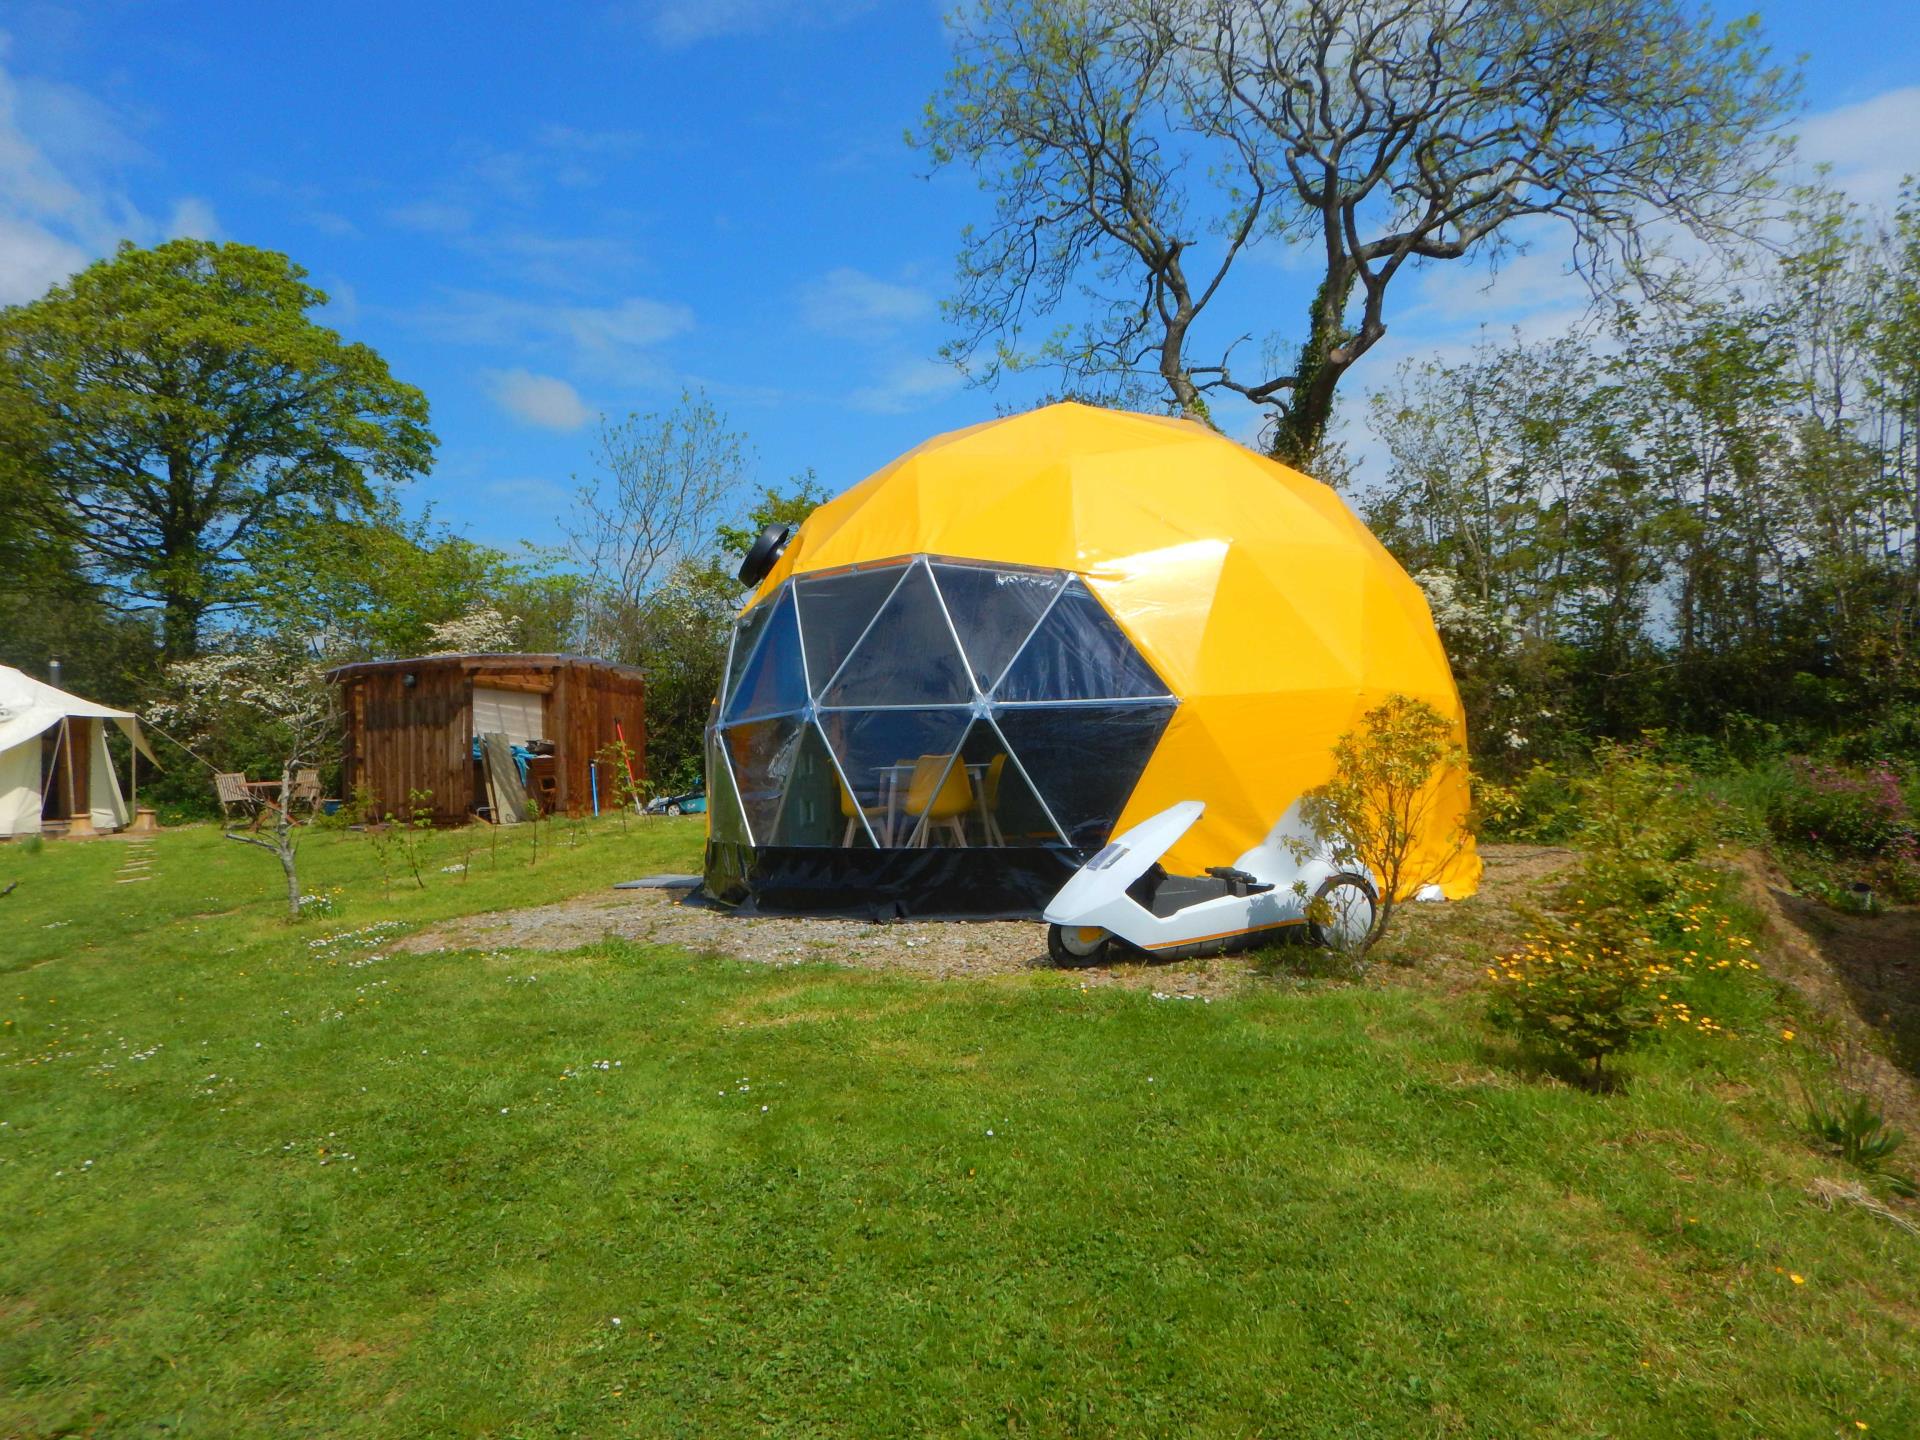 The PACMAN Geodesic Dome